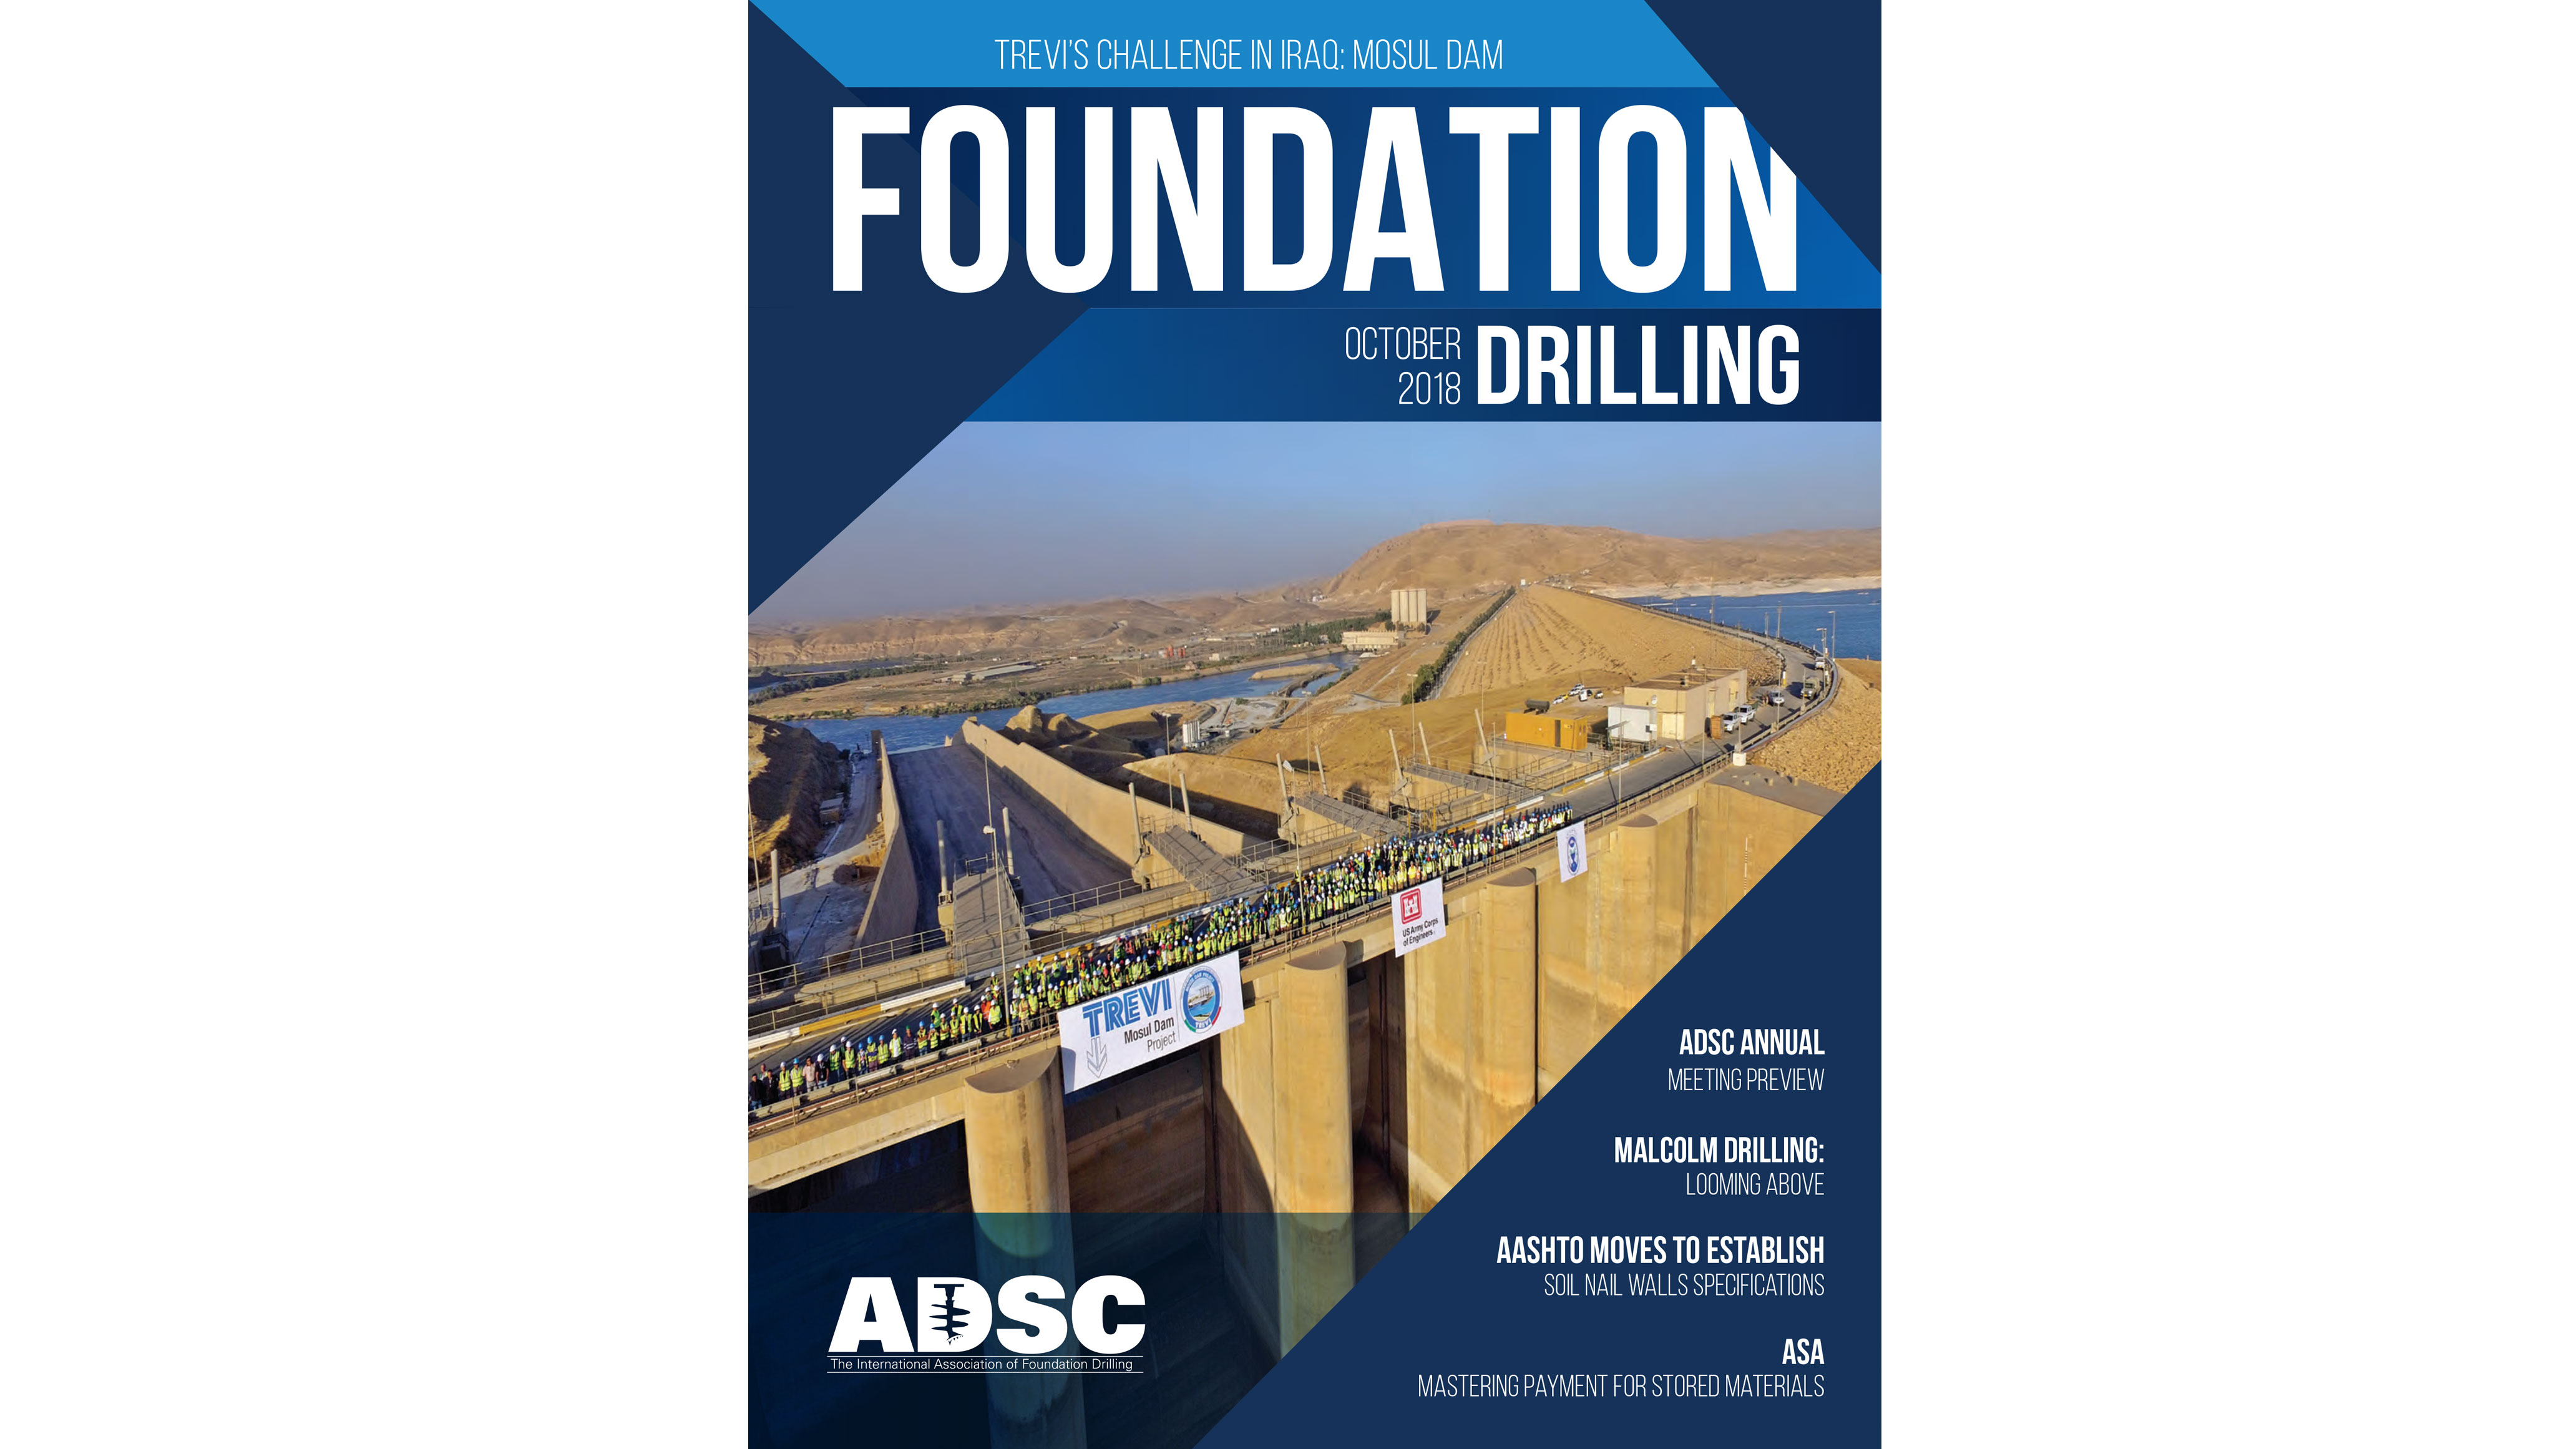 The Mosul jobsite on the cover of ADSC Foundation Drilling Trevi spa